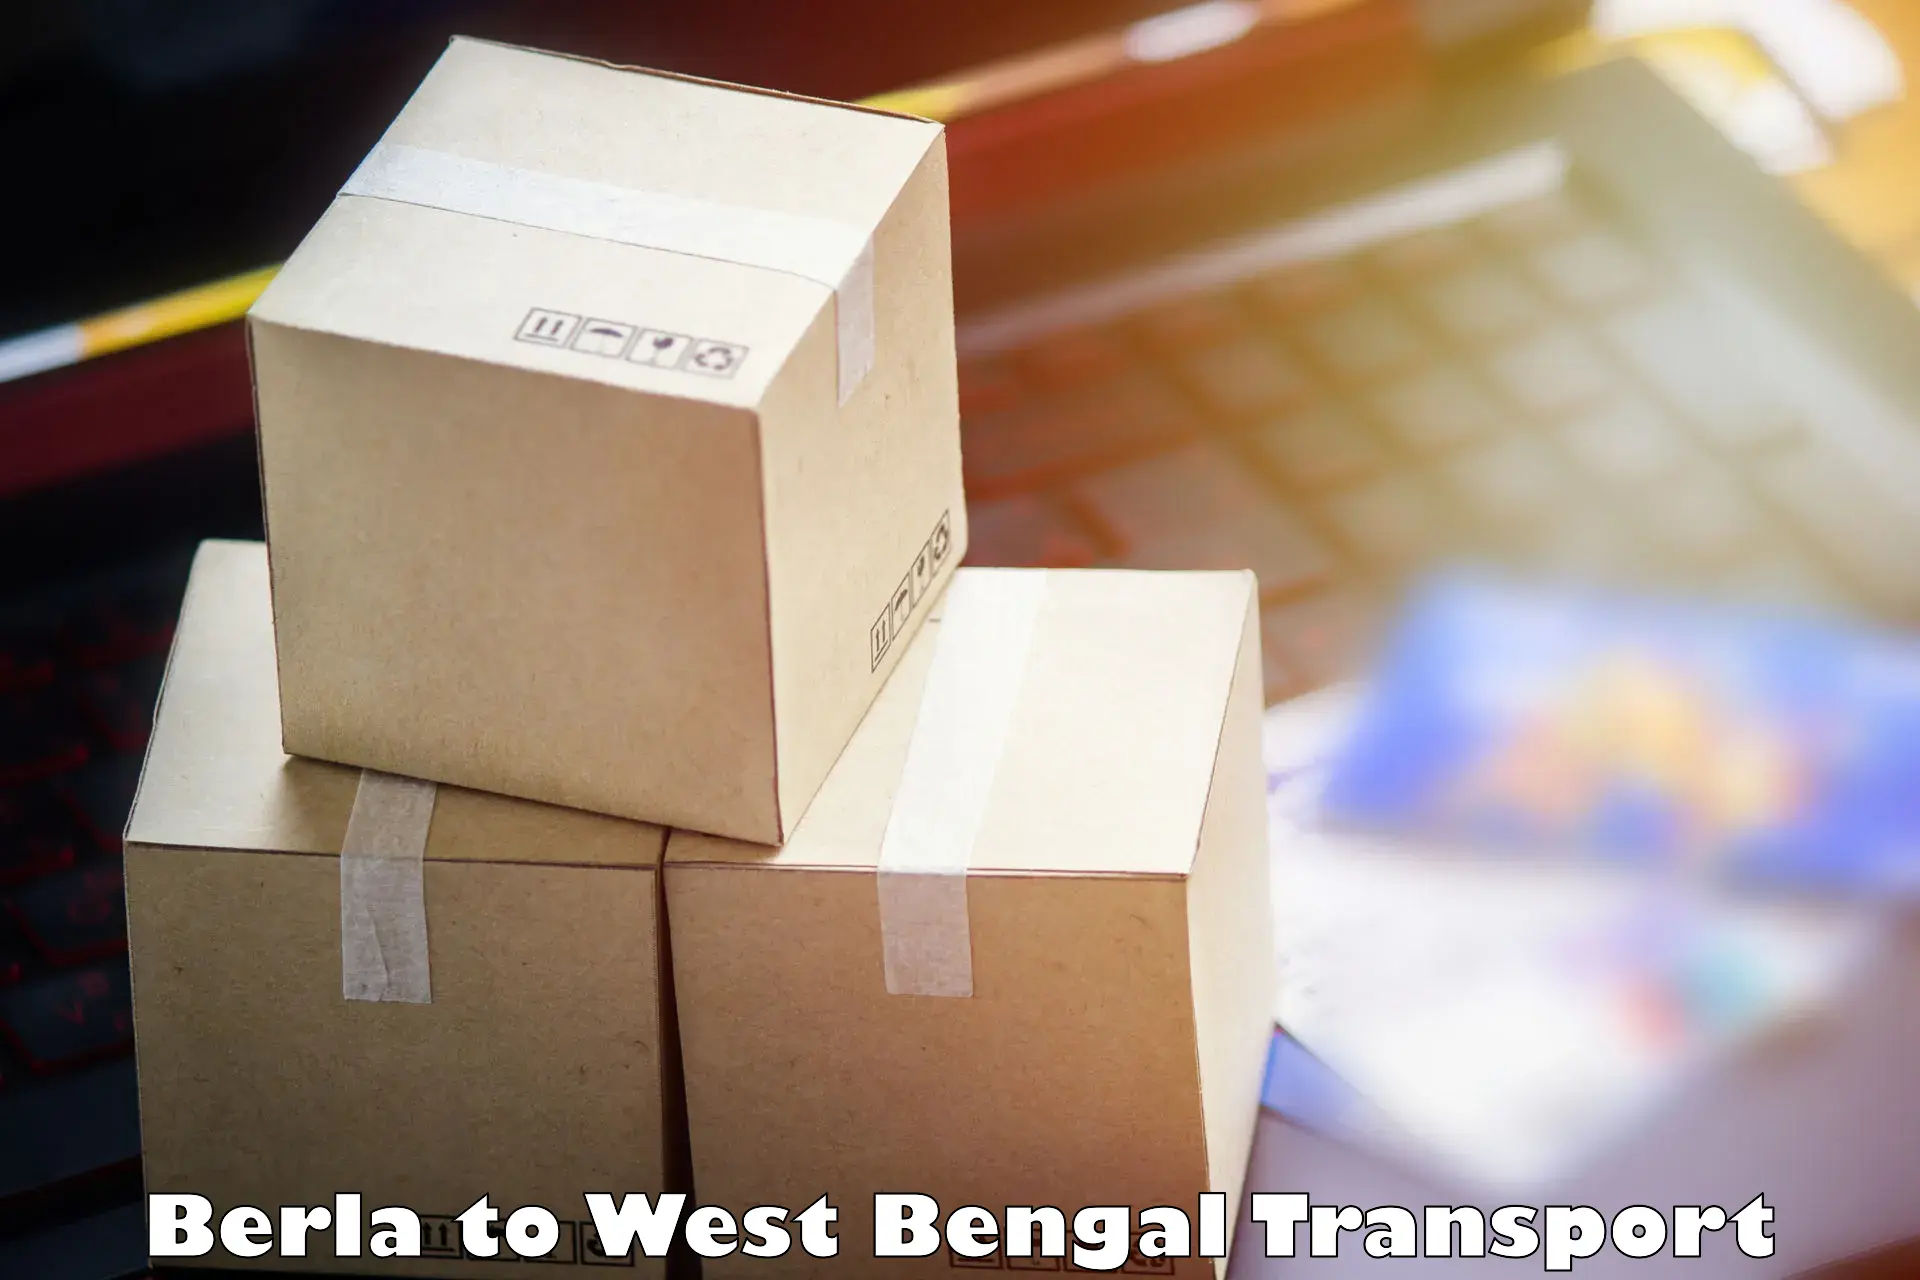 Container transport service Berla to West Bengal